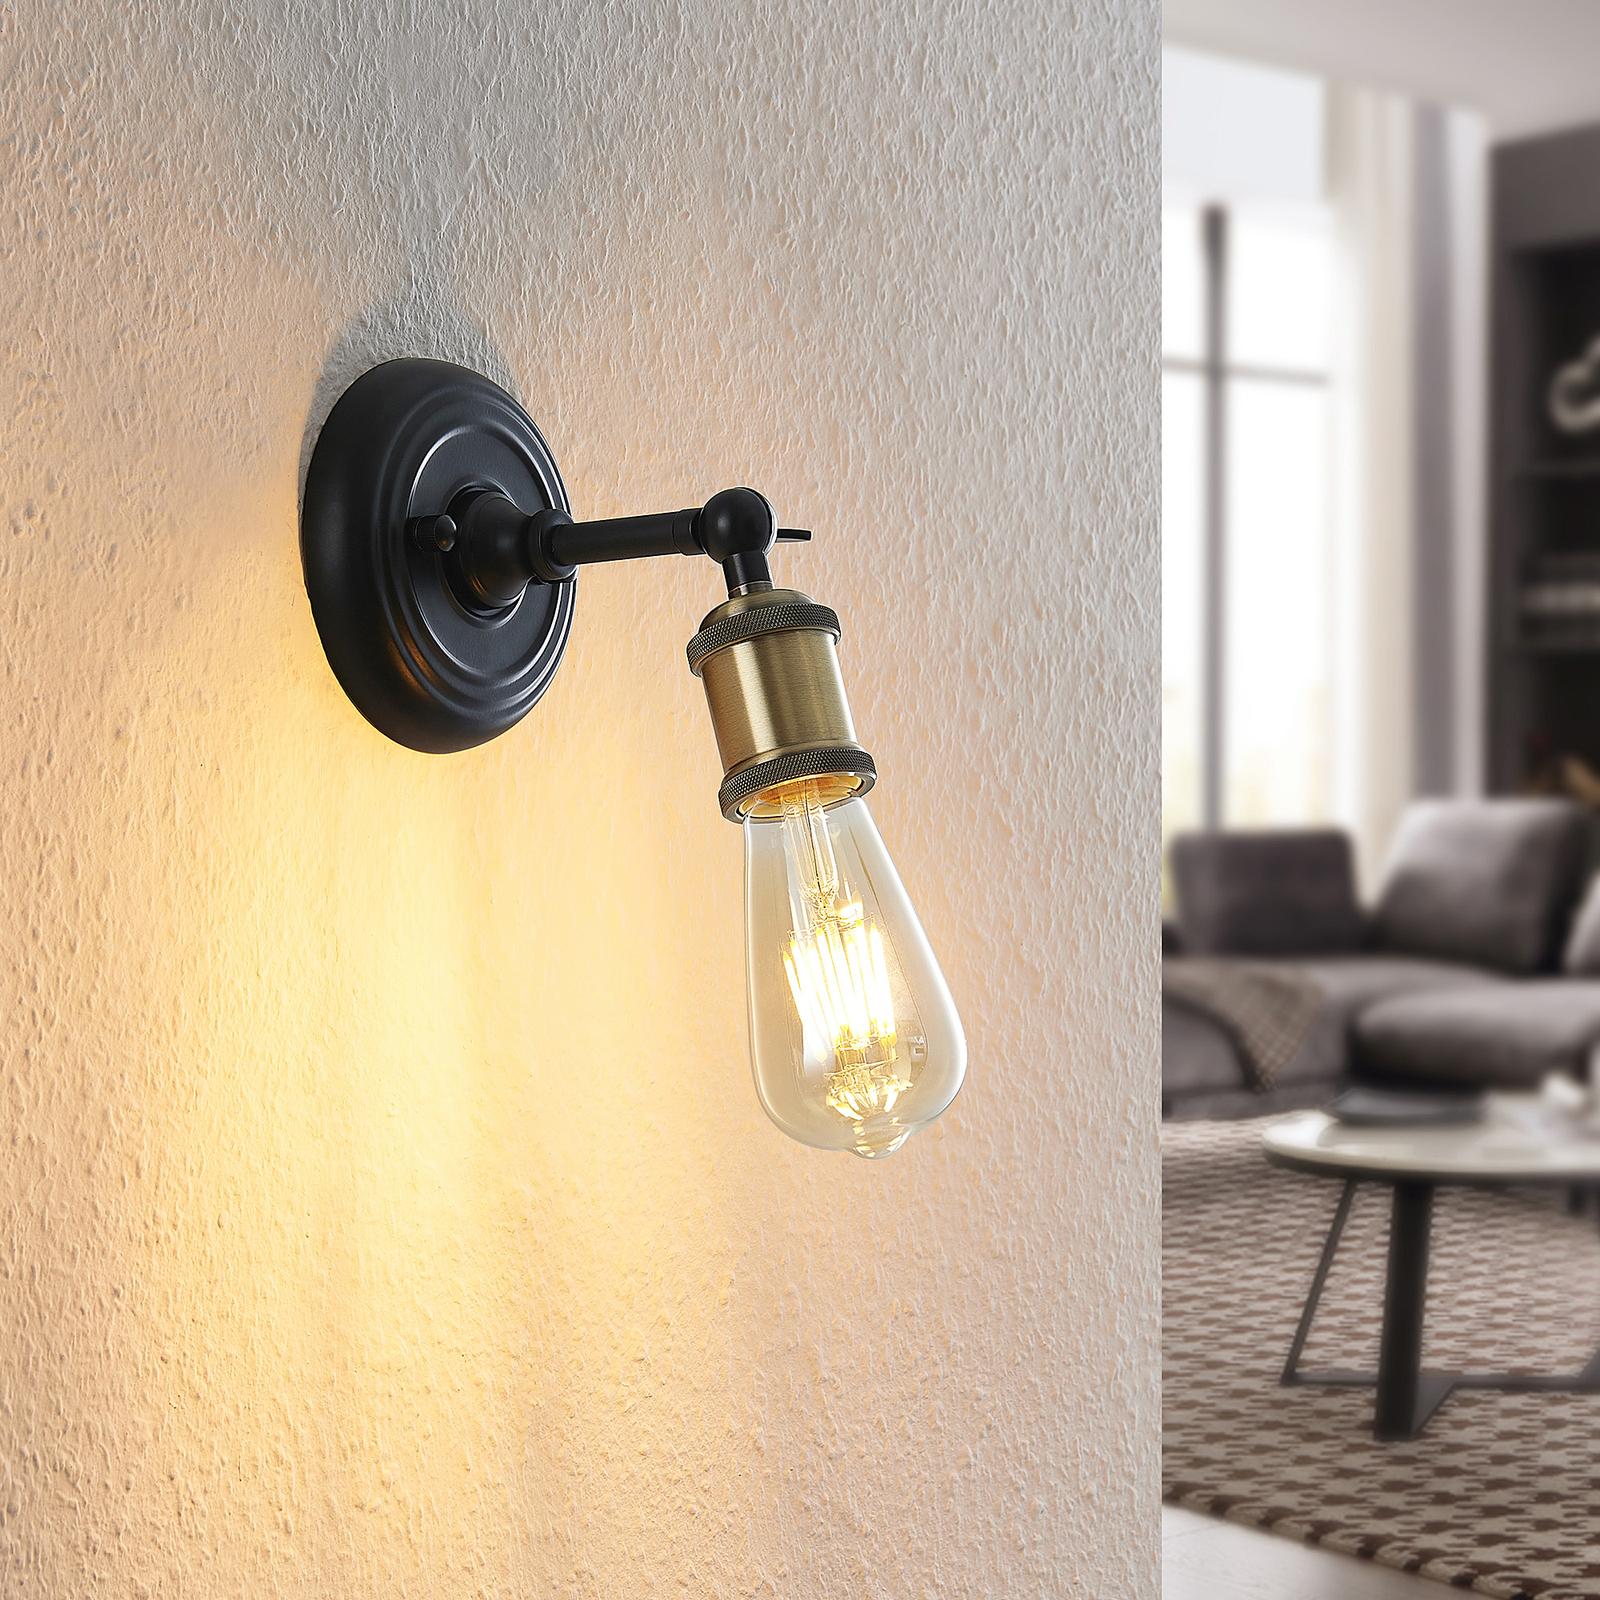 Lindby Aturia wall light in an antique design